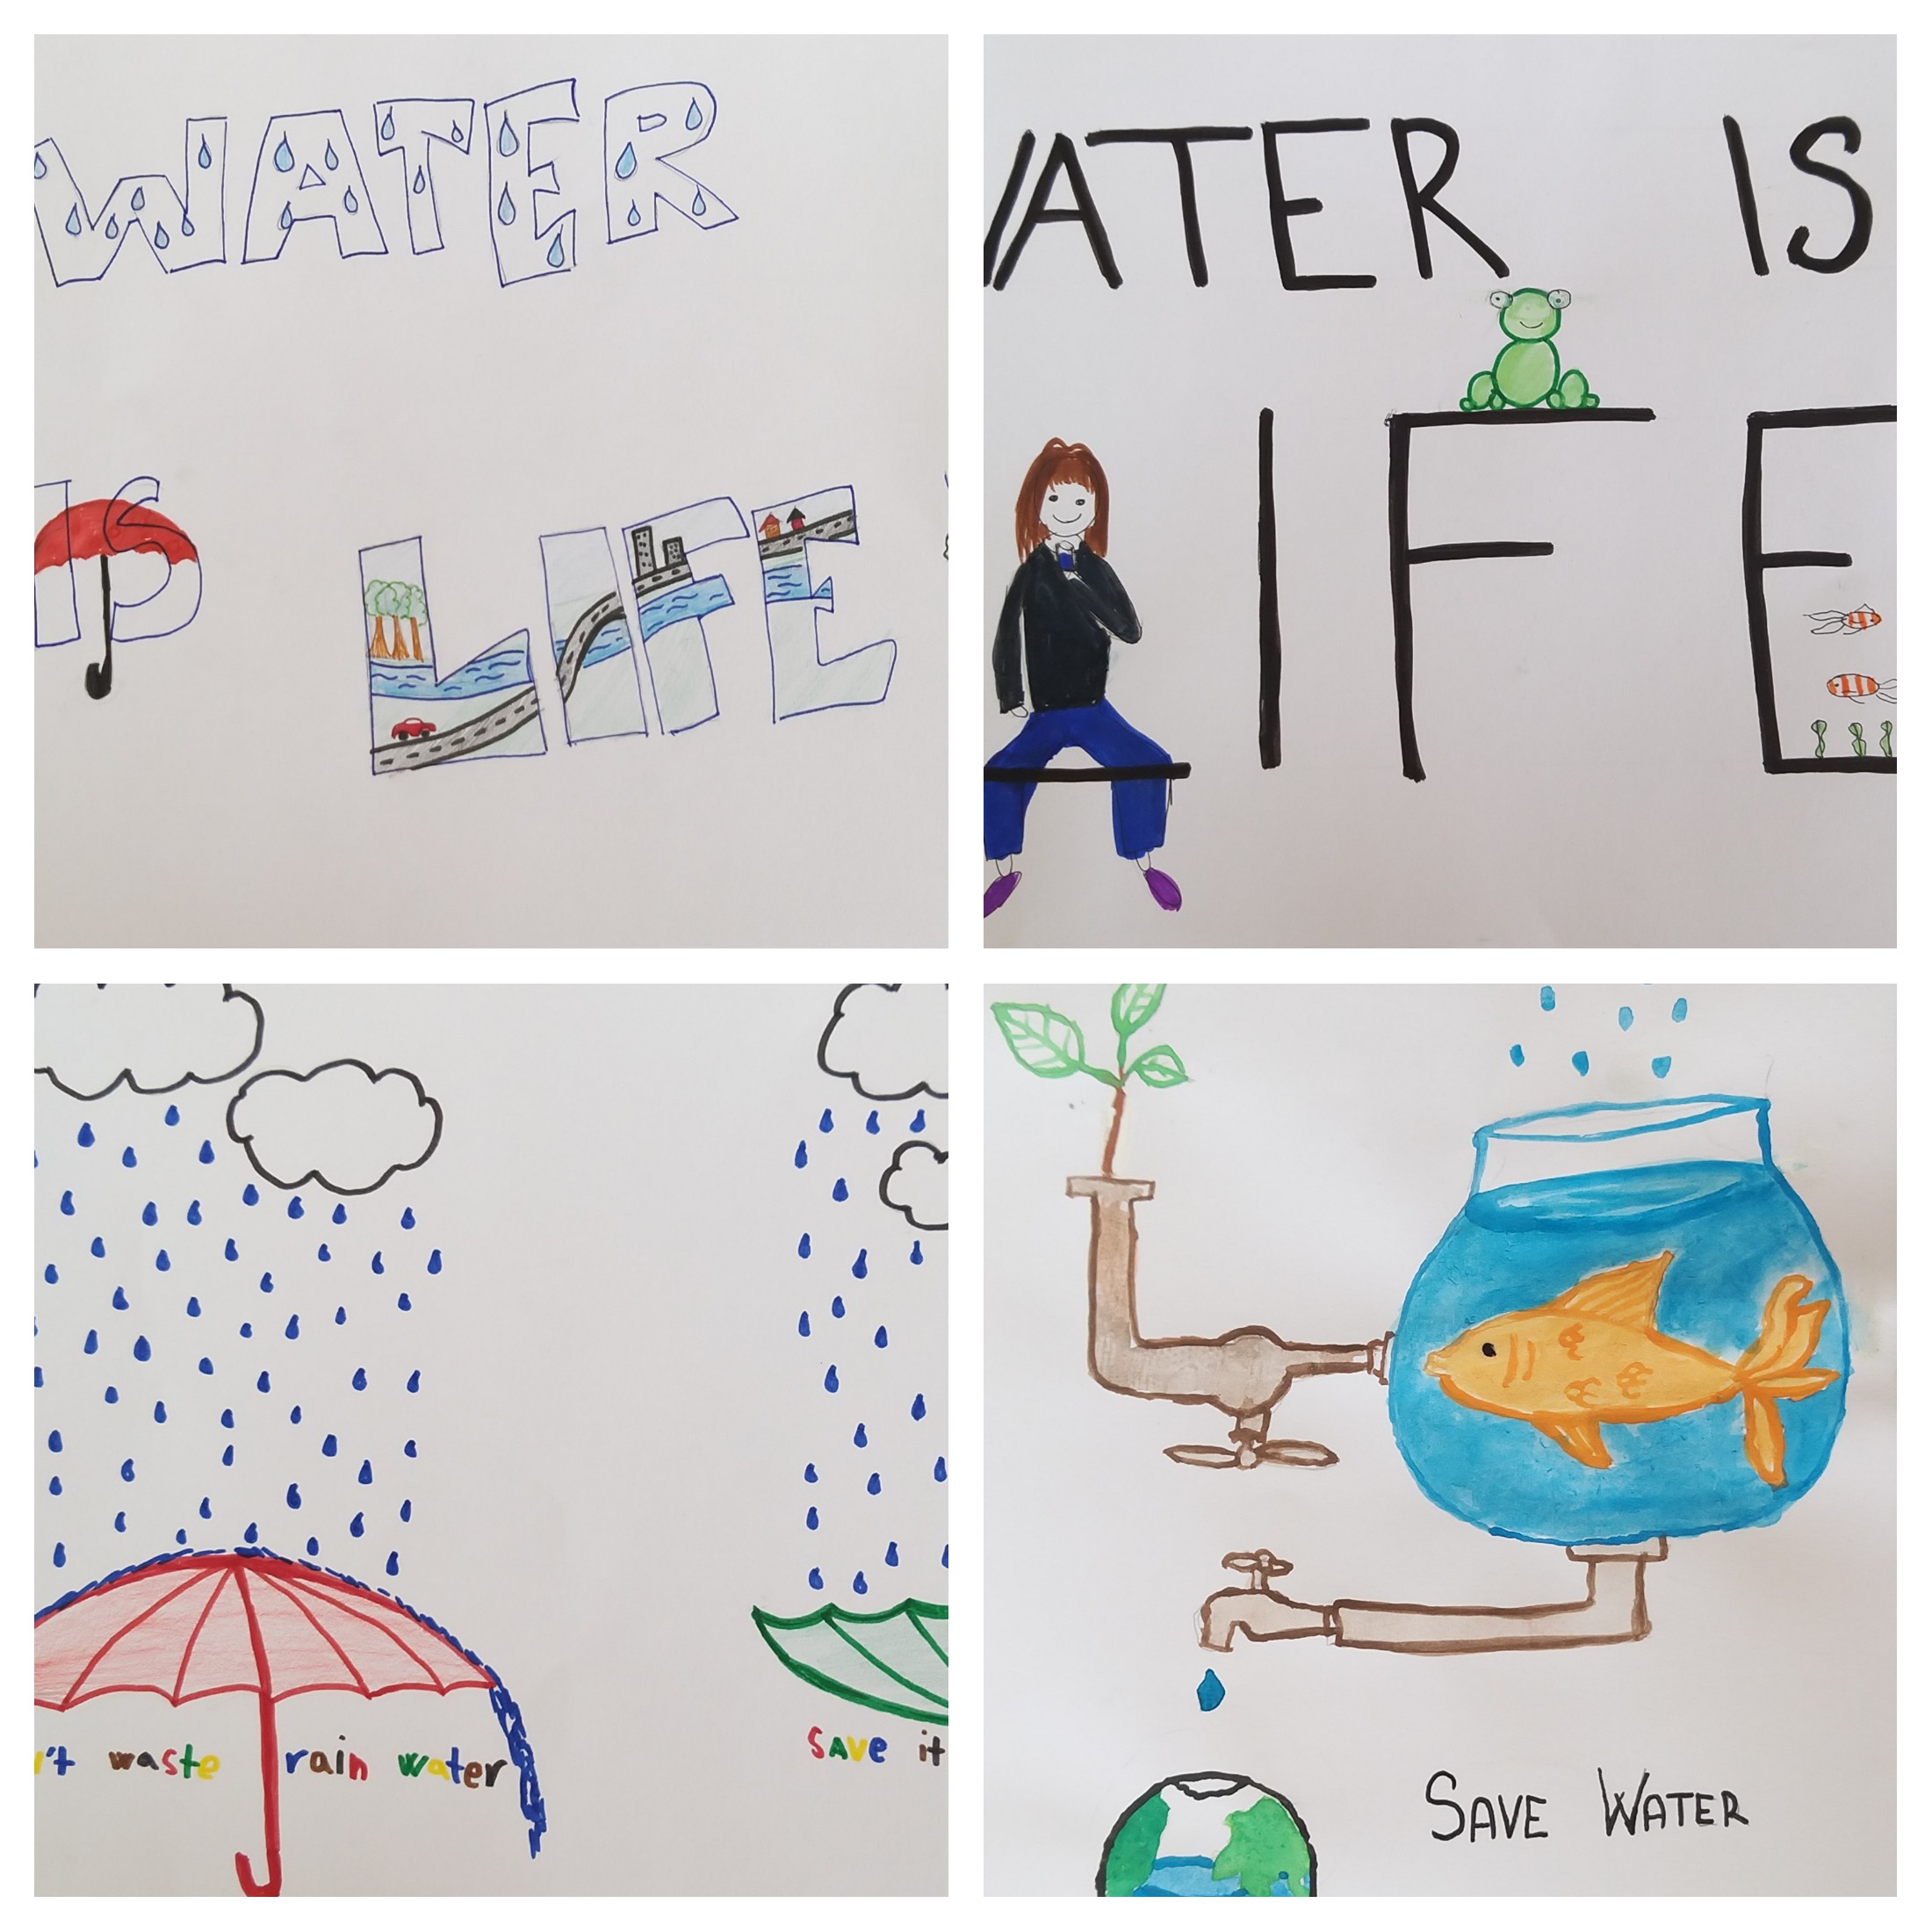 water-is-life-posters-2